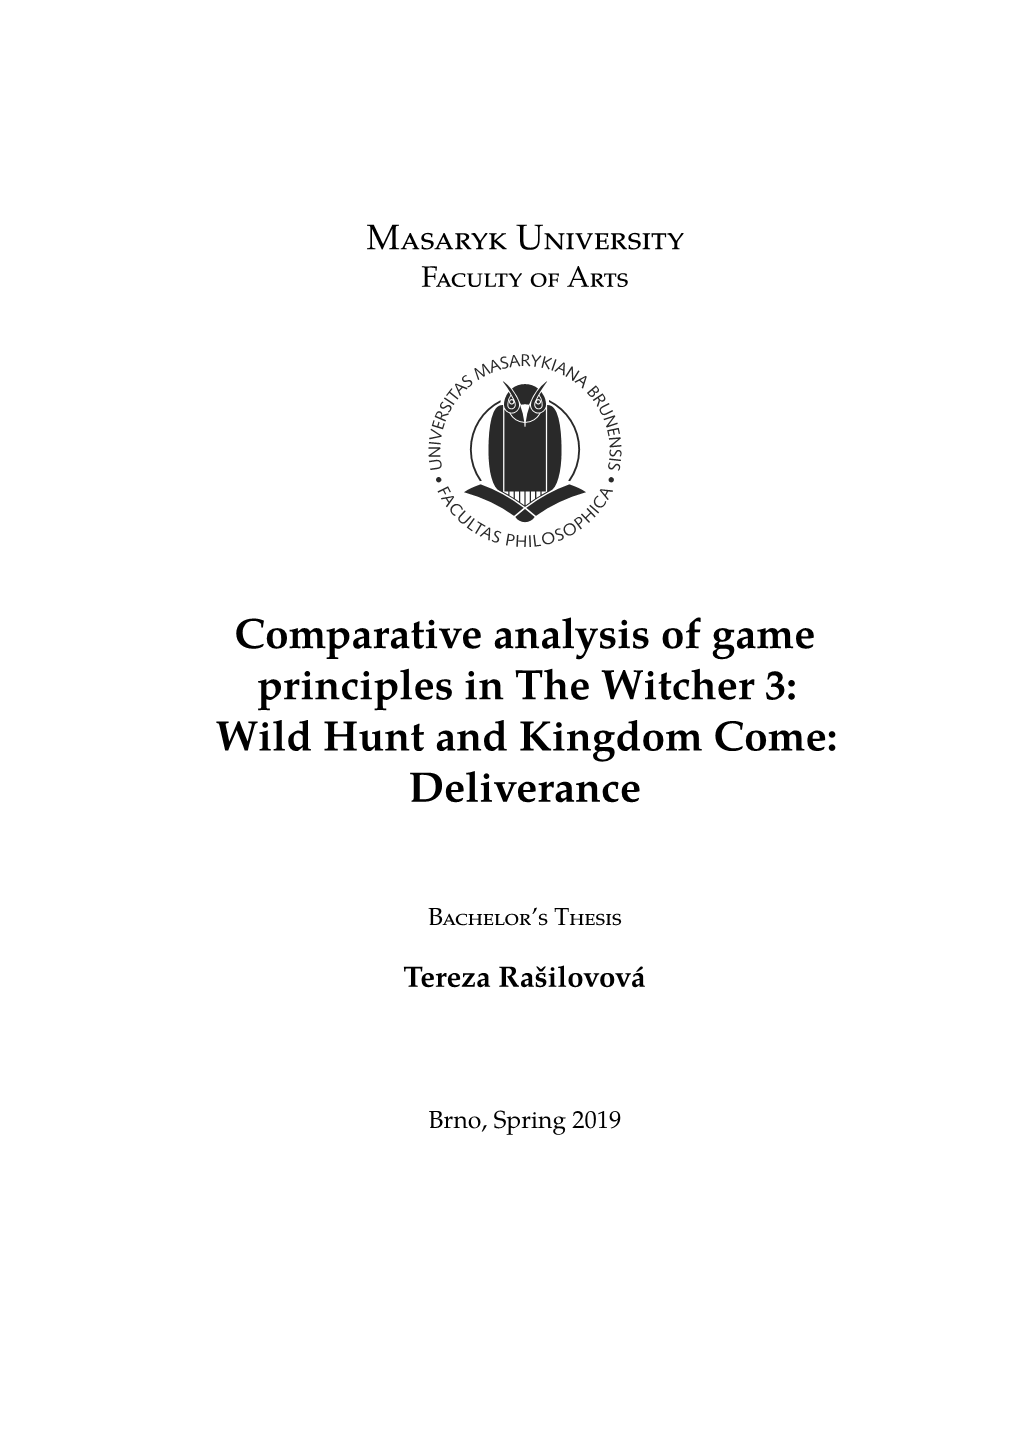 Comparative Analysis of Game Principles in the Witcher 3: Wild Hunt and Kingdom Come: Deliverance